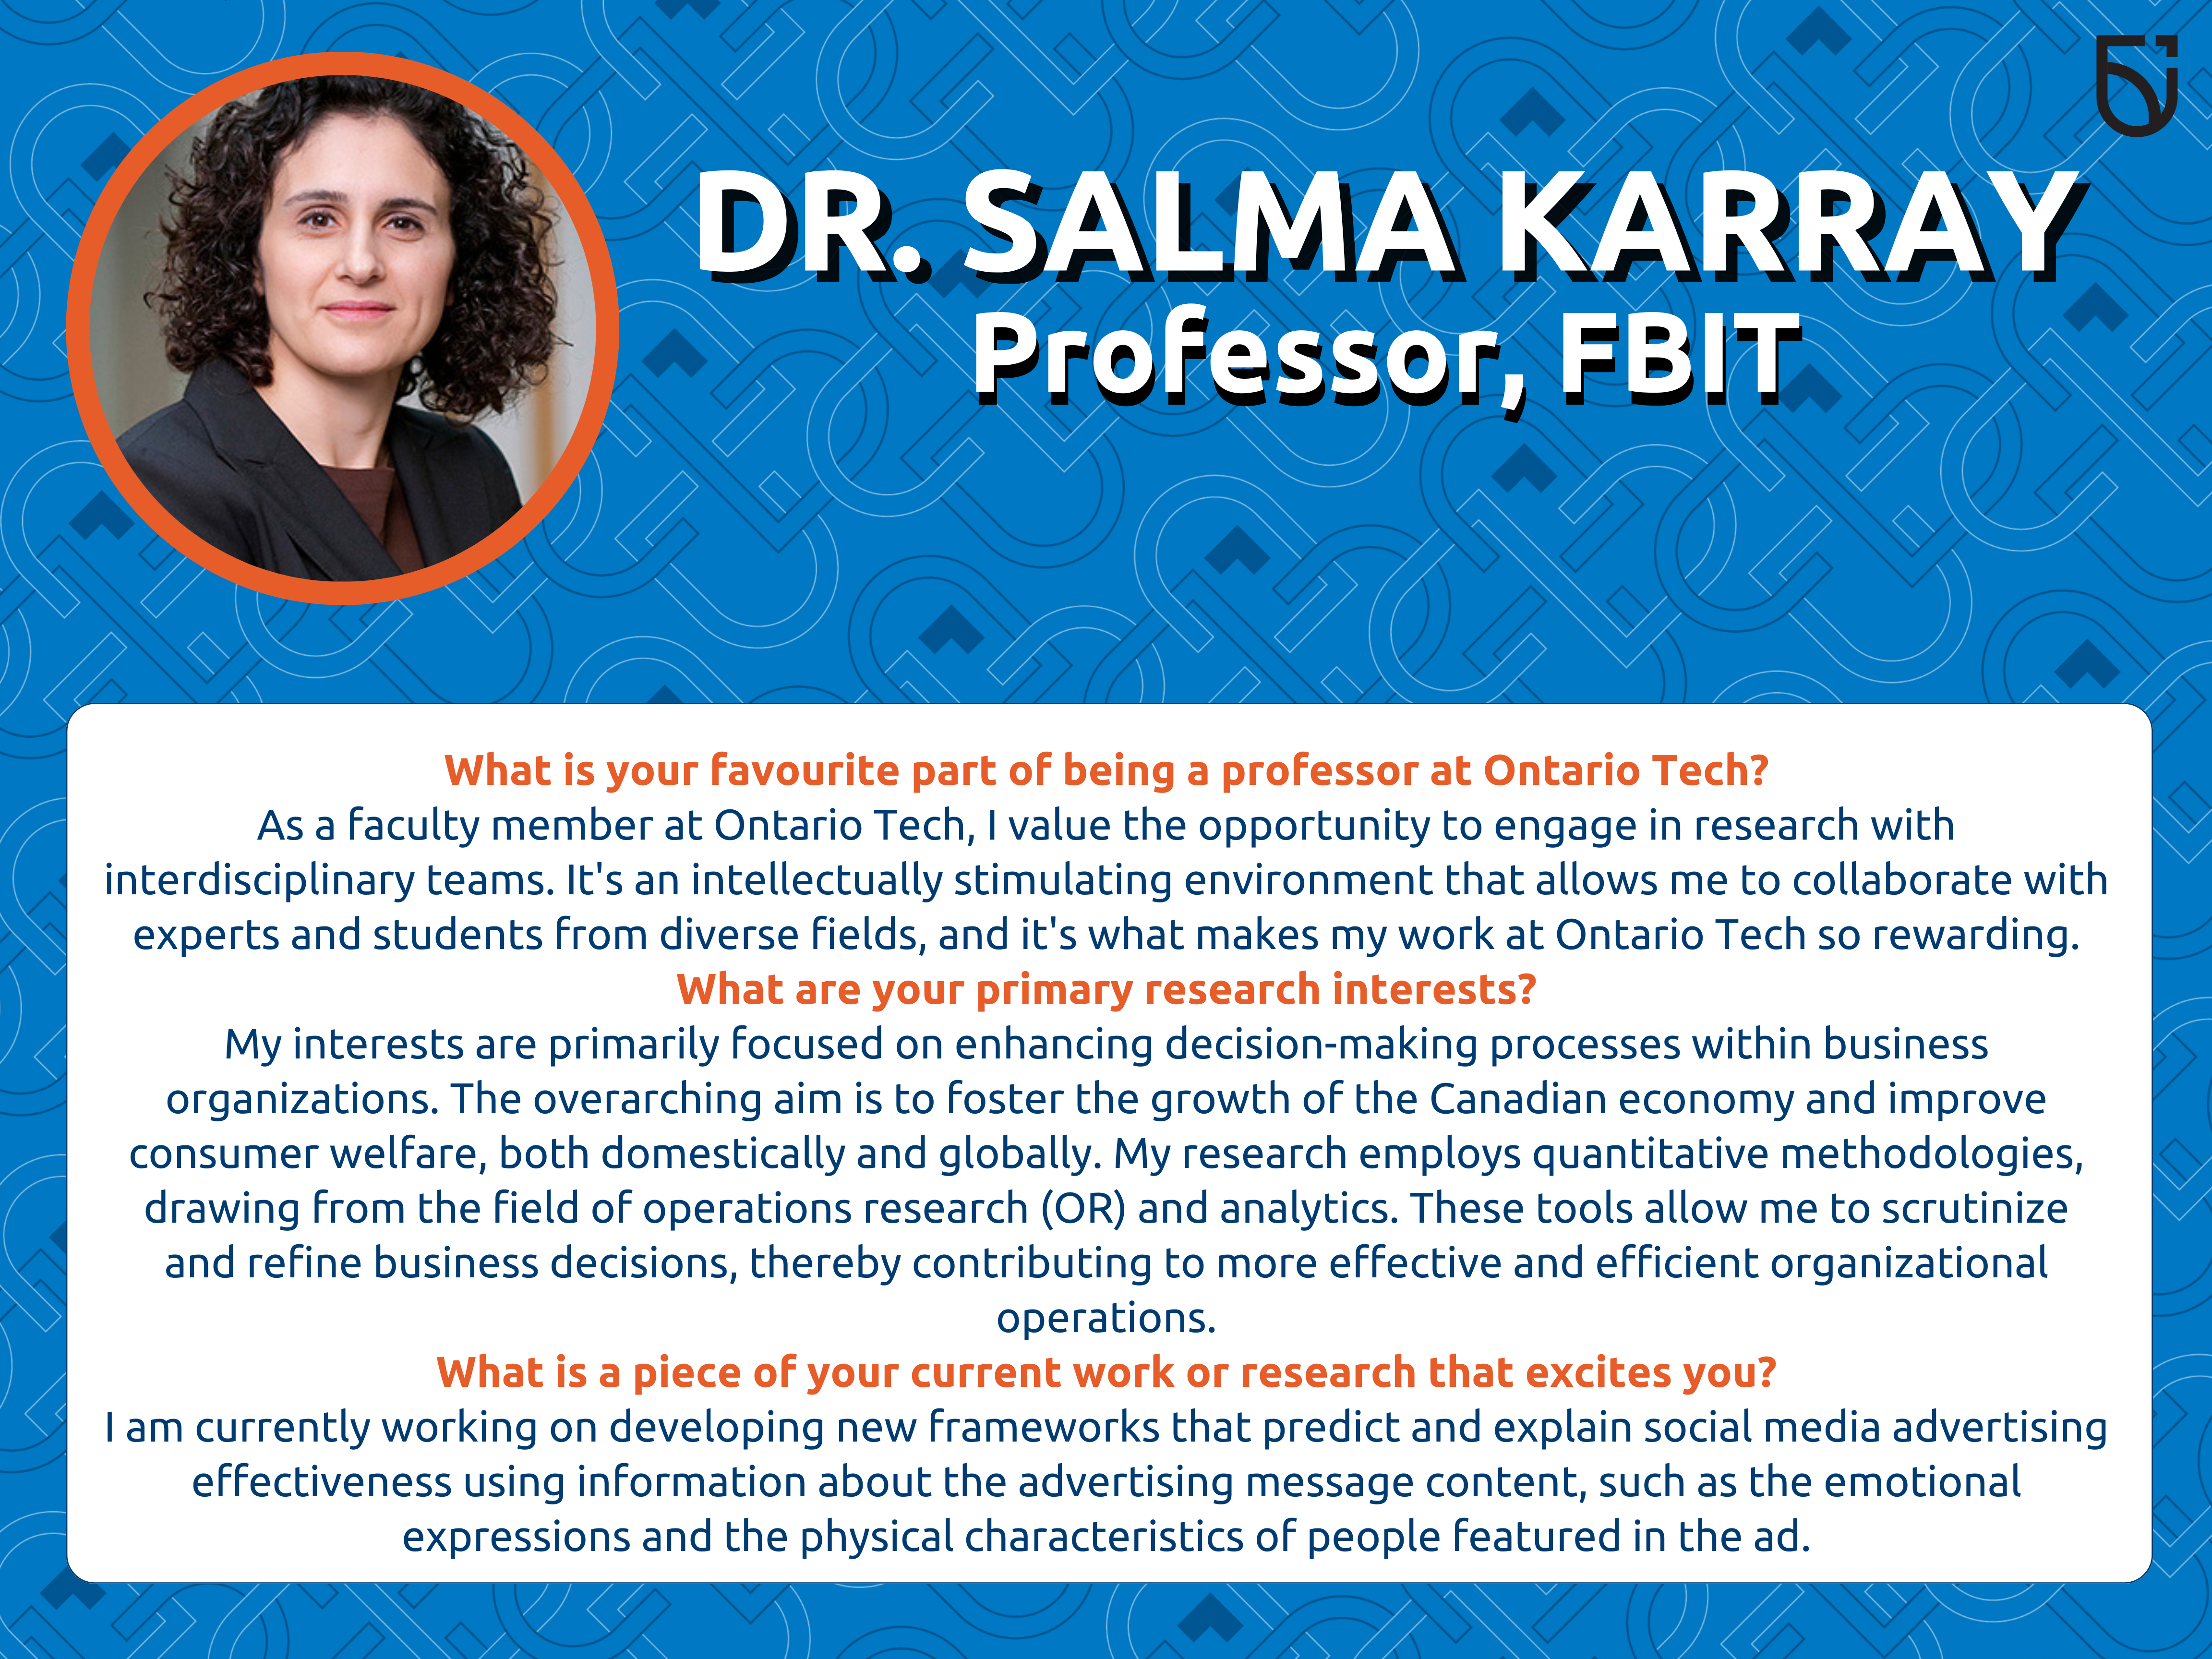 This photo is a Women’s Wednesday feature of Dr. Karray, a Professor in the Faculty of Business and IT